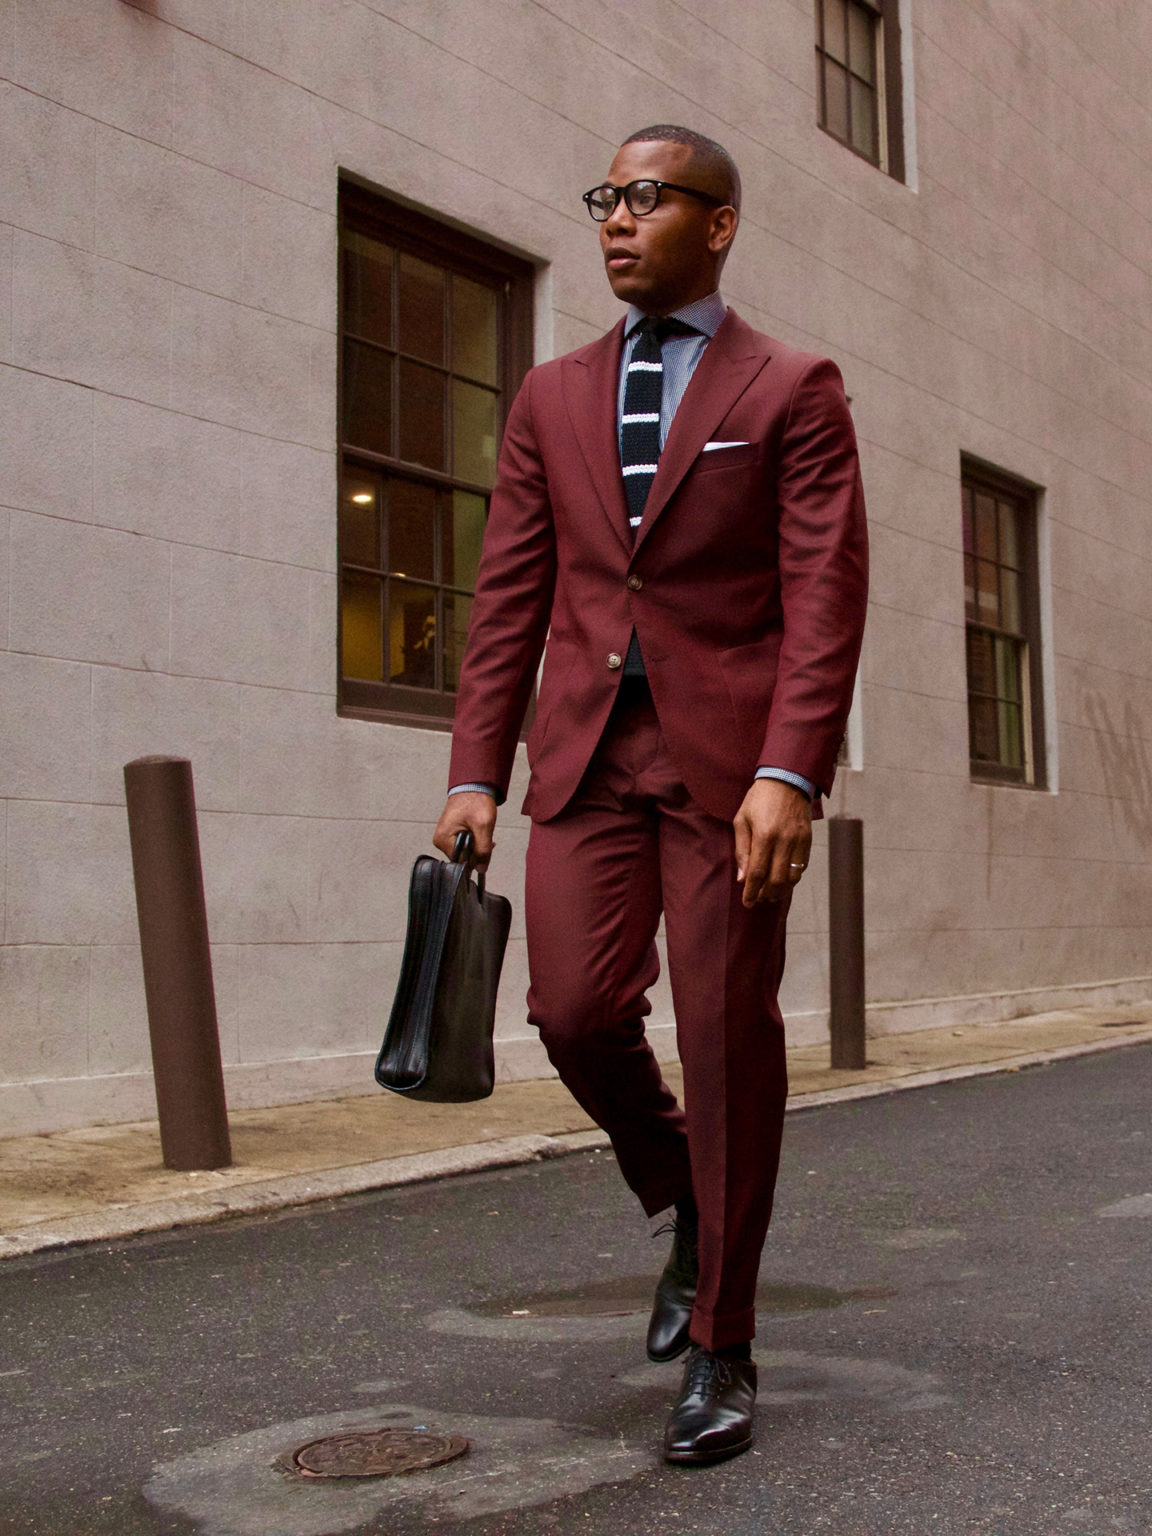 Maroon Suit Color Combinations with Shirt and Tie